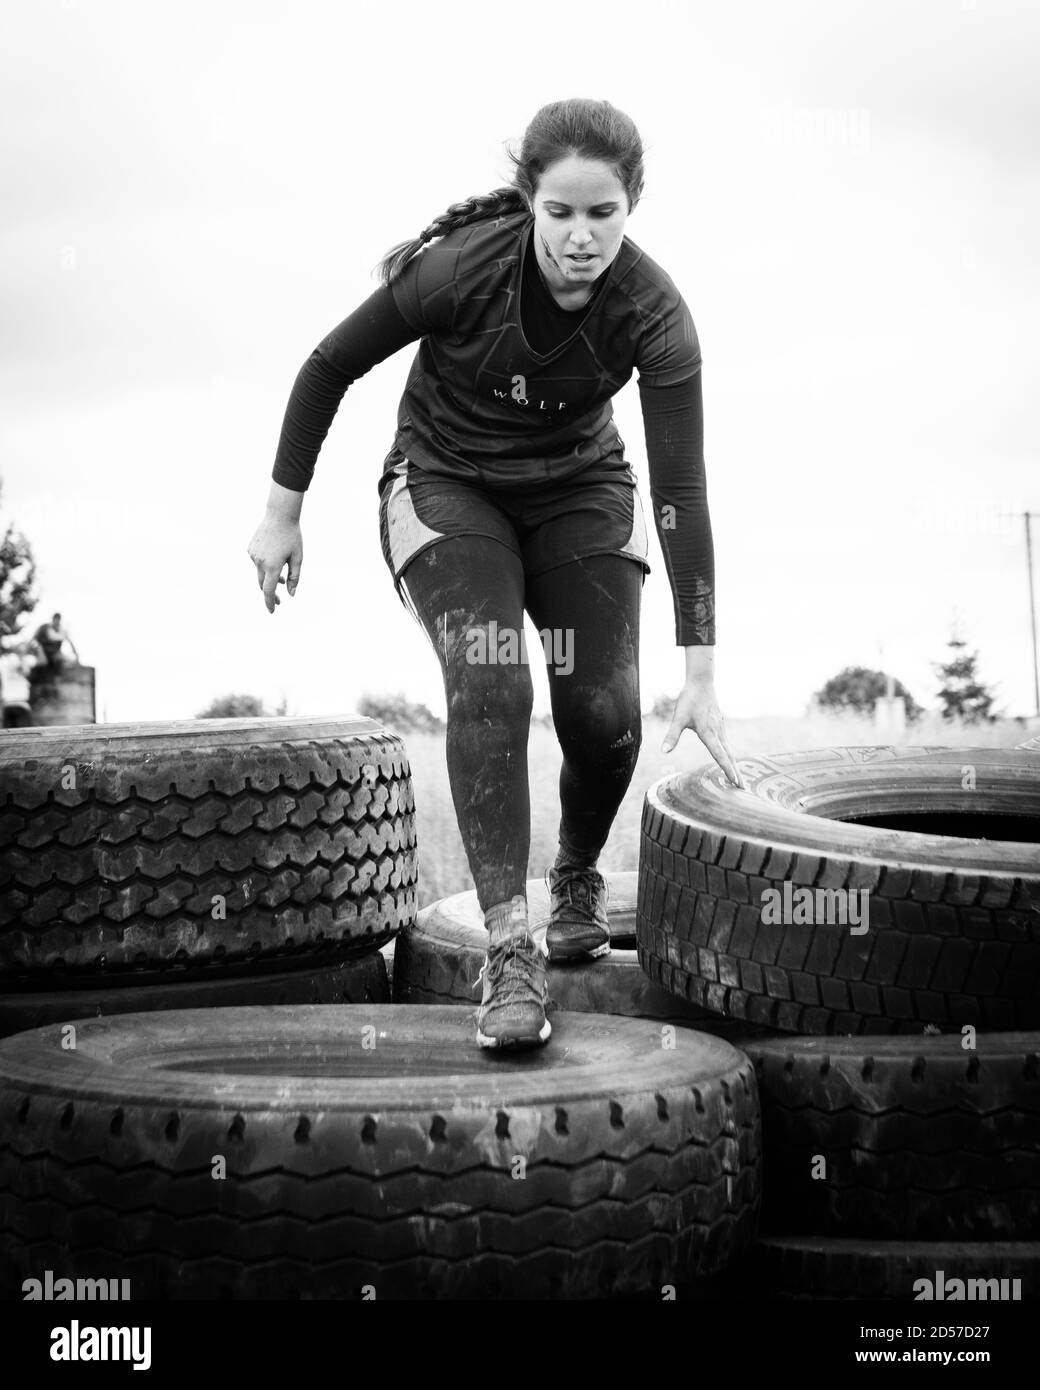 TAMWORTH, UNITED KINGDOM - Oct 15, 2015: More photos from the Scorpion Run tough mudder outdoor obstacle course mud run. Stock Photo